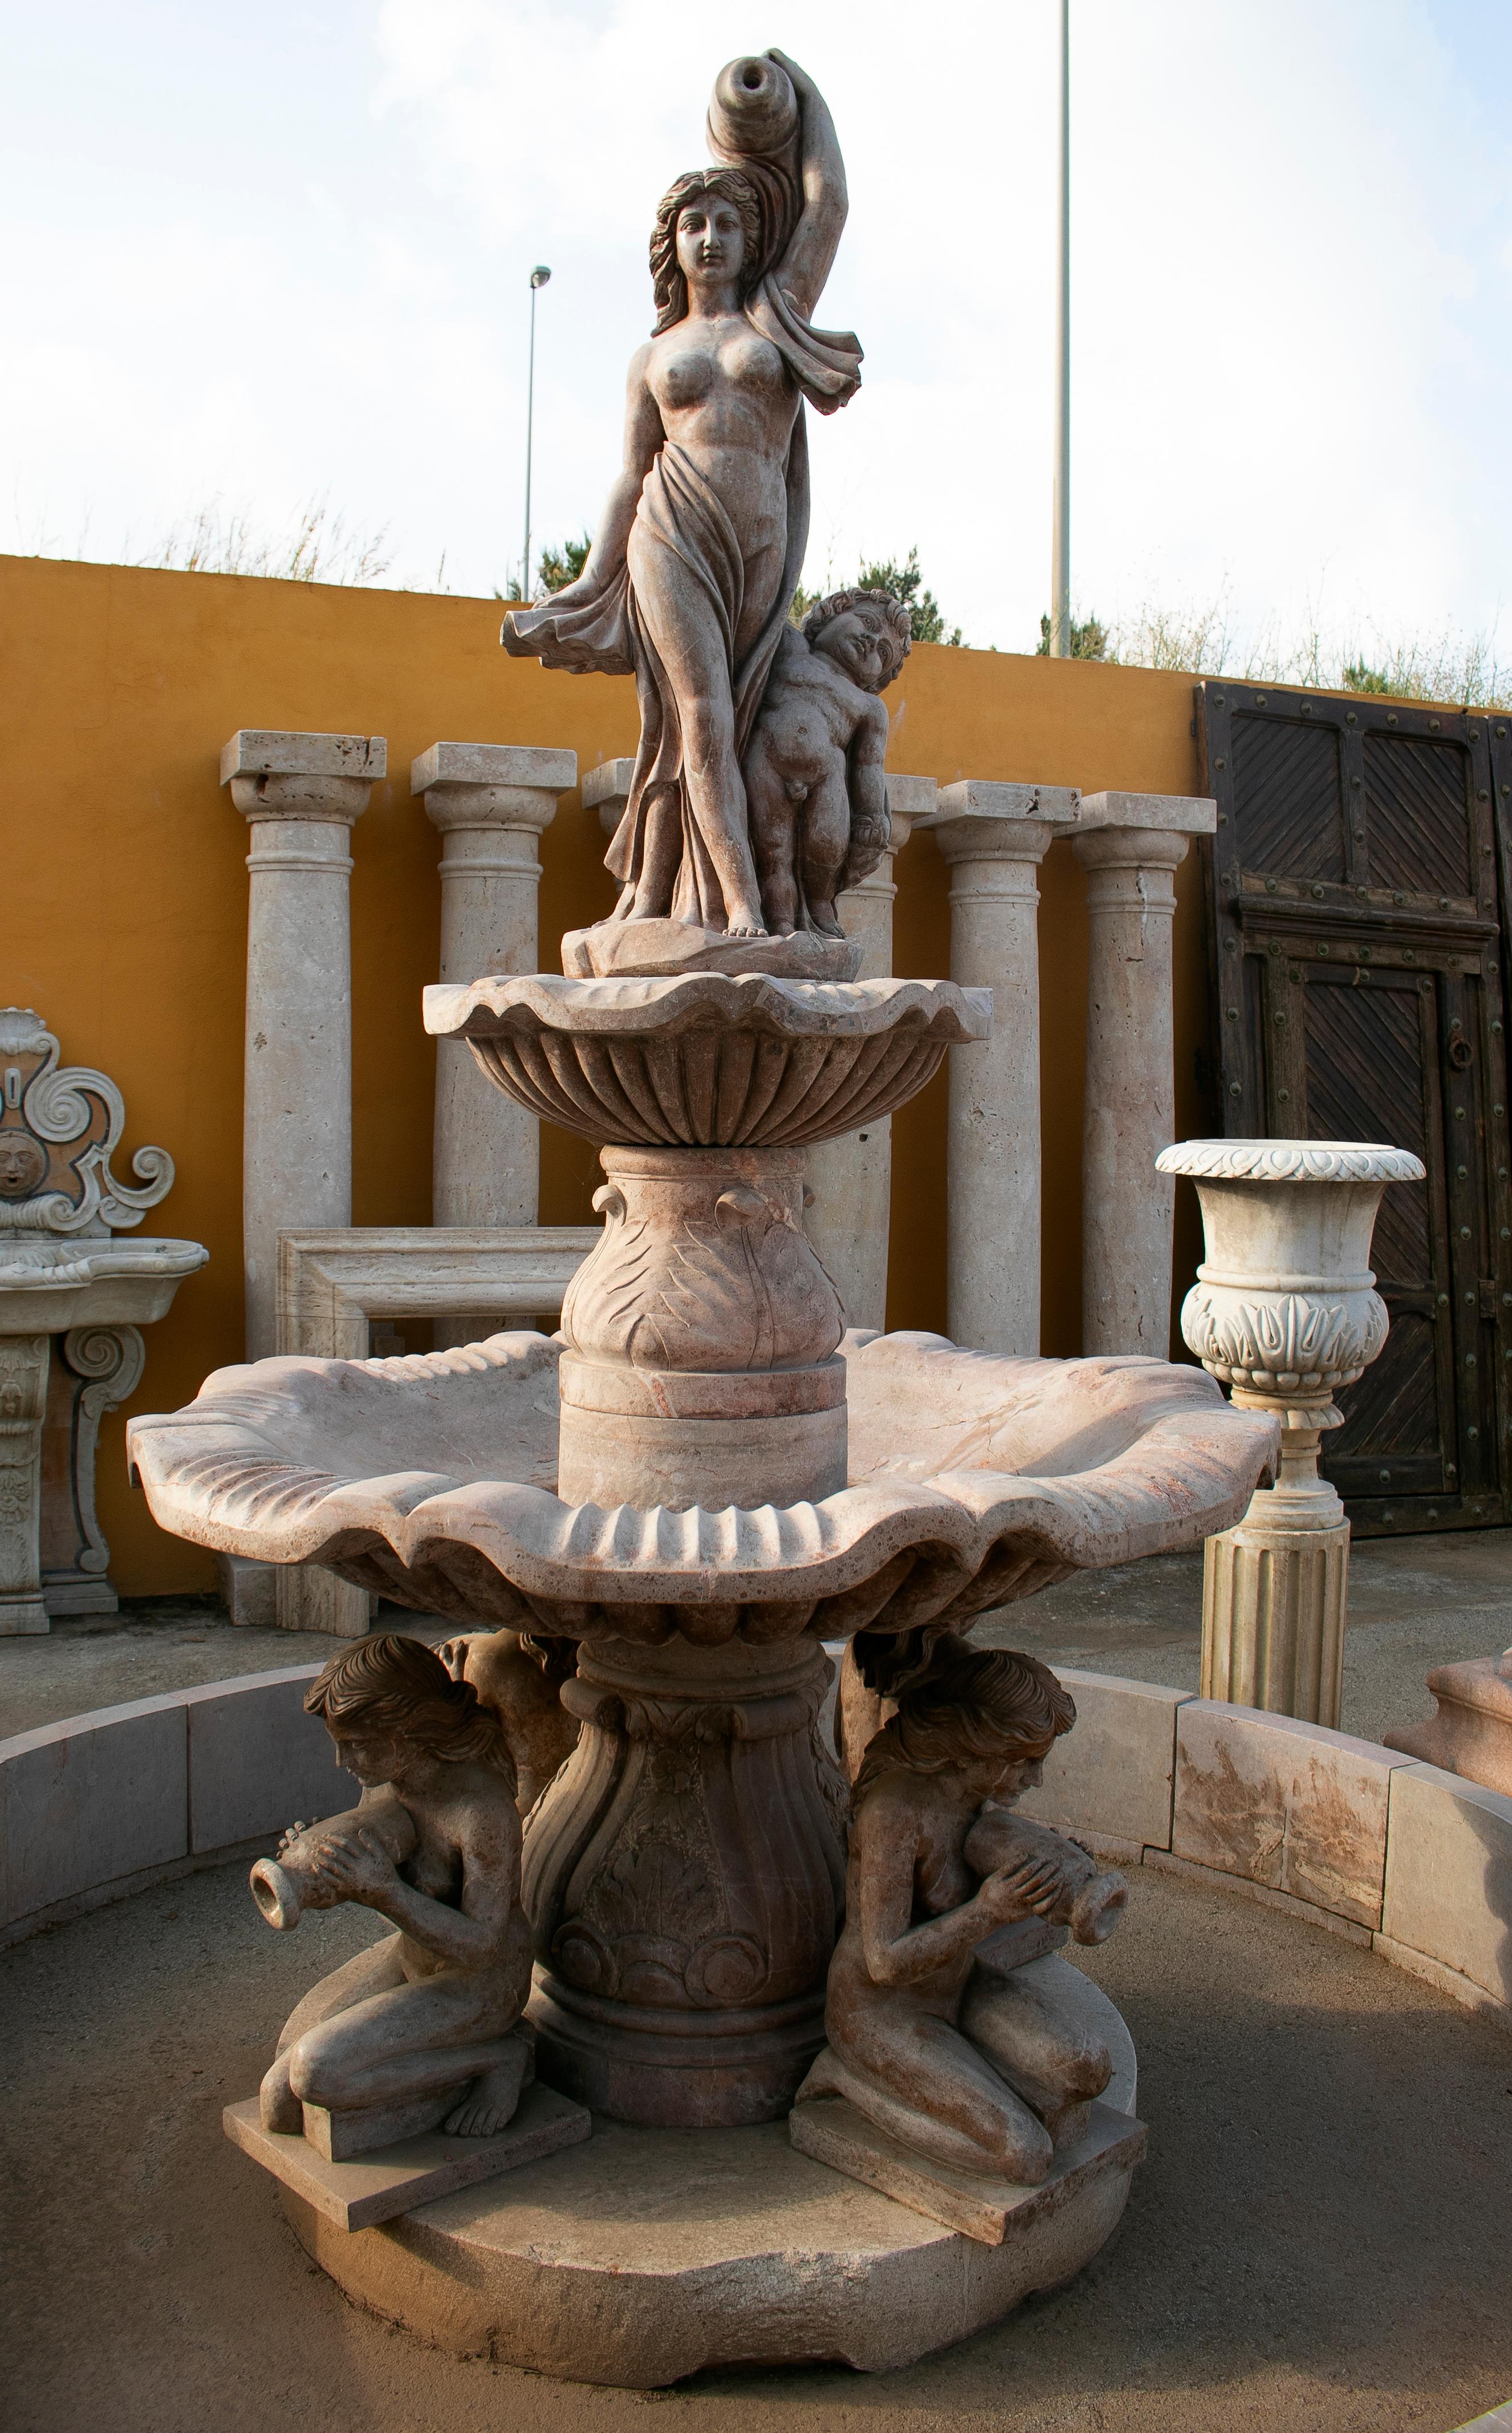 Two tier hand carved brown marble fountain with pool and sculptures.

Fountain dimensions: 305 x 160 x 160 cm
Pool dimension: 34 x 290 cm.